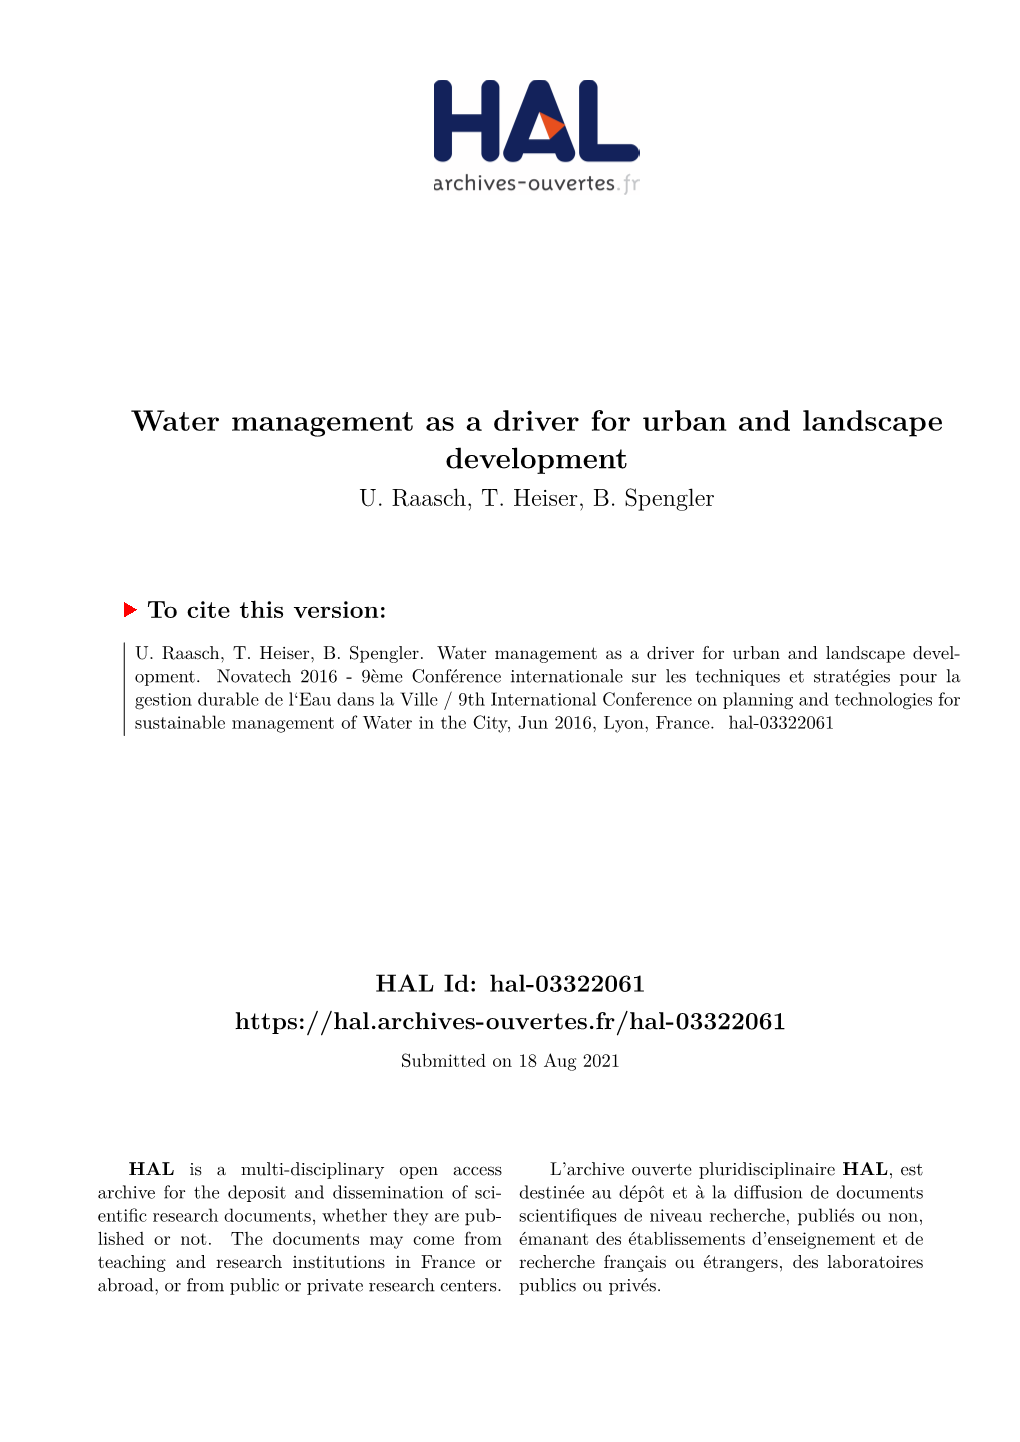 Water Management As a Driver for Urban and Landscape Development U